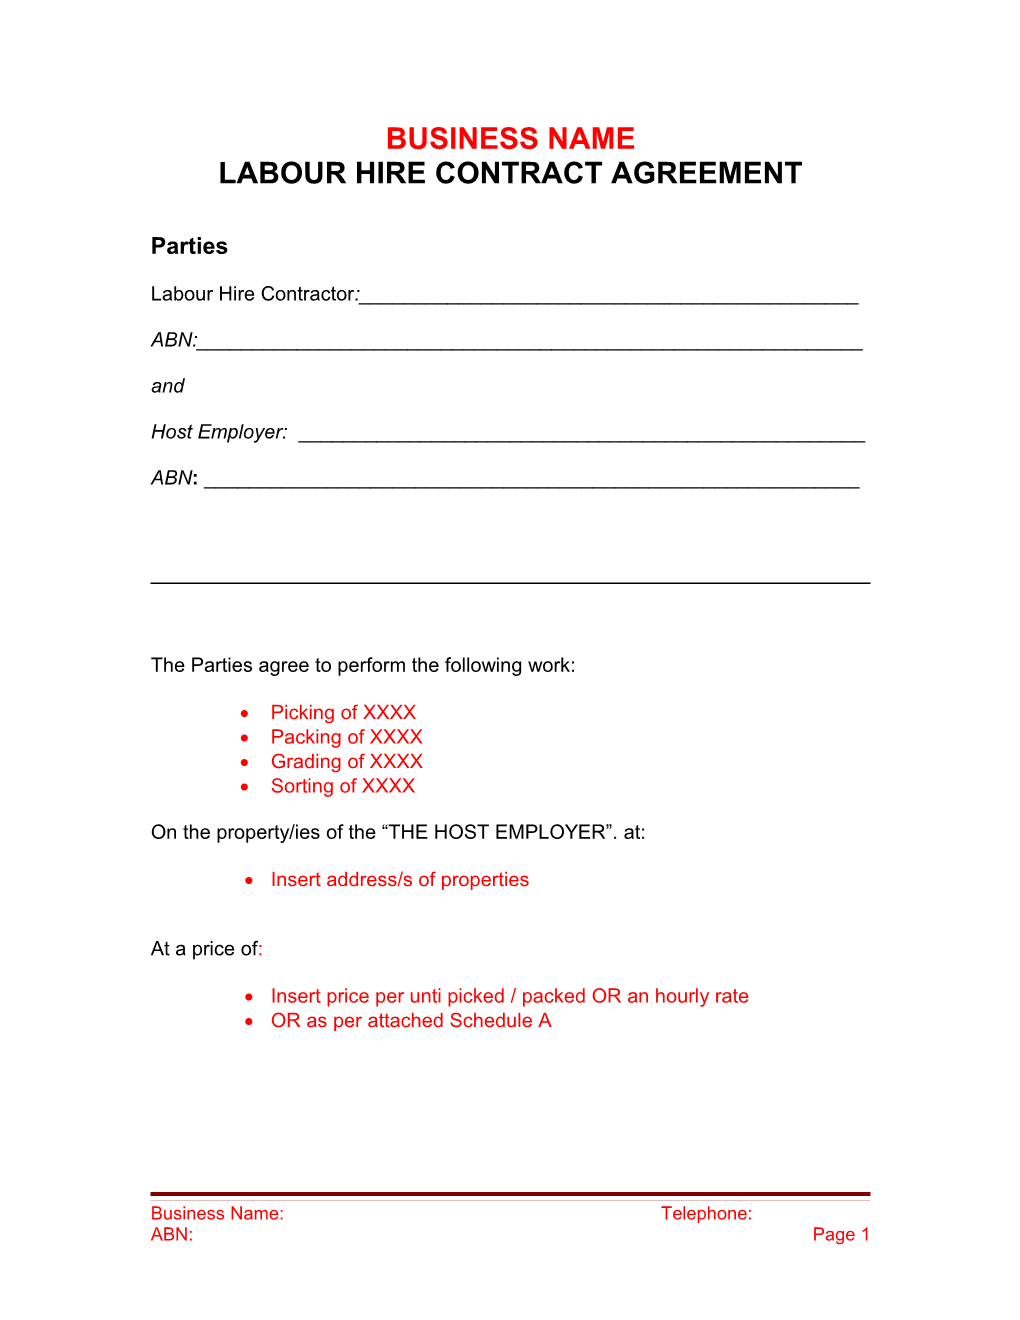 Labour Hire Contract Agreement